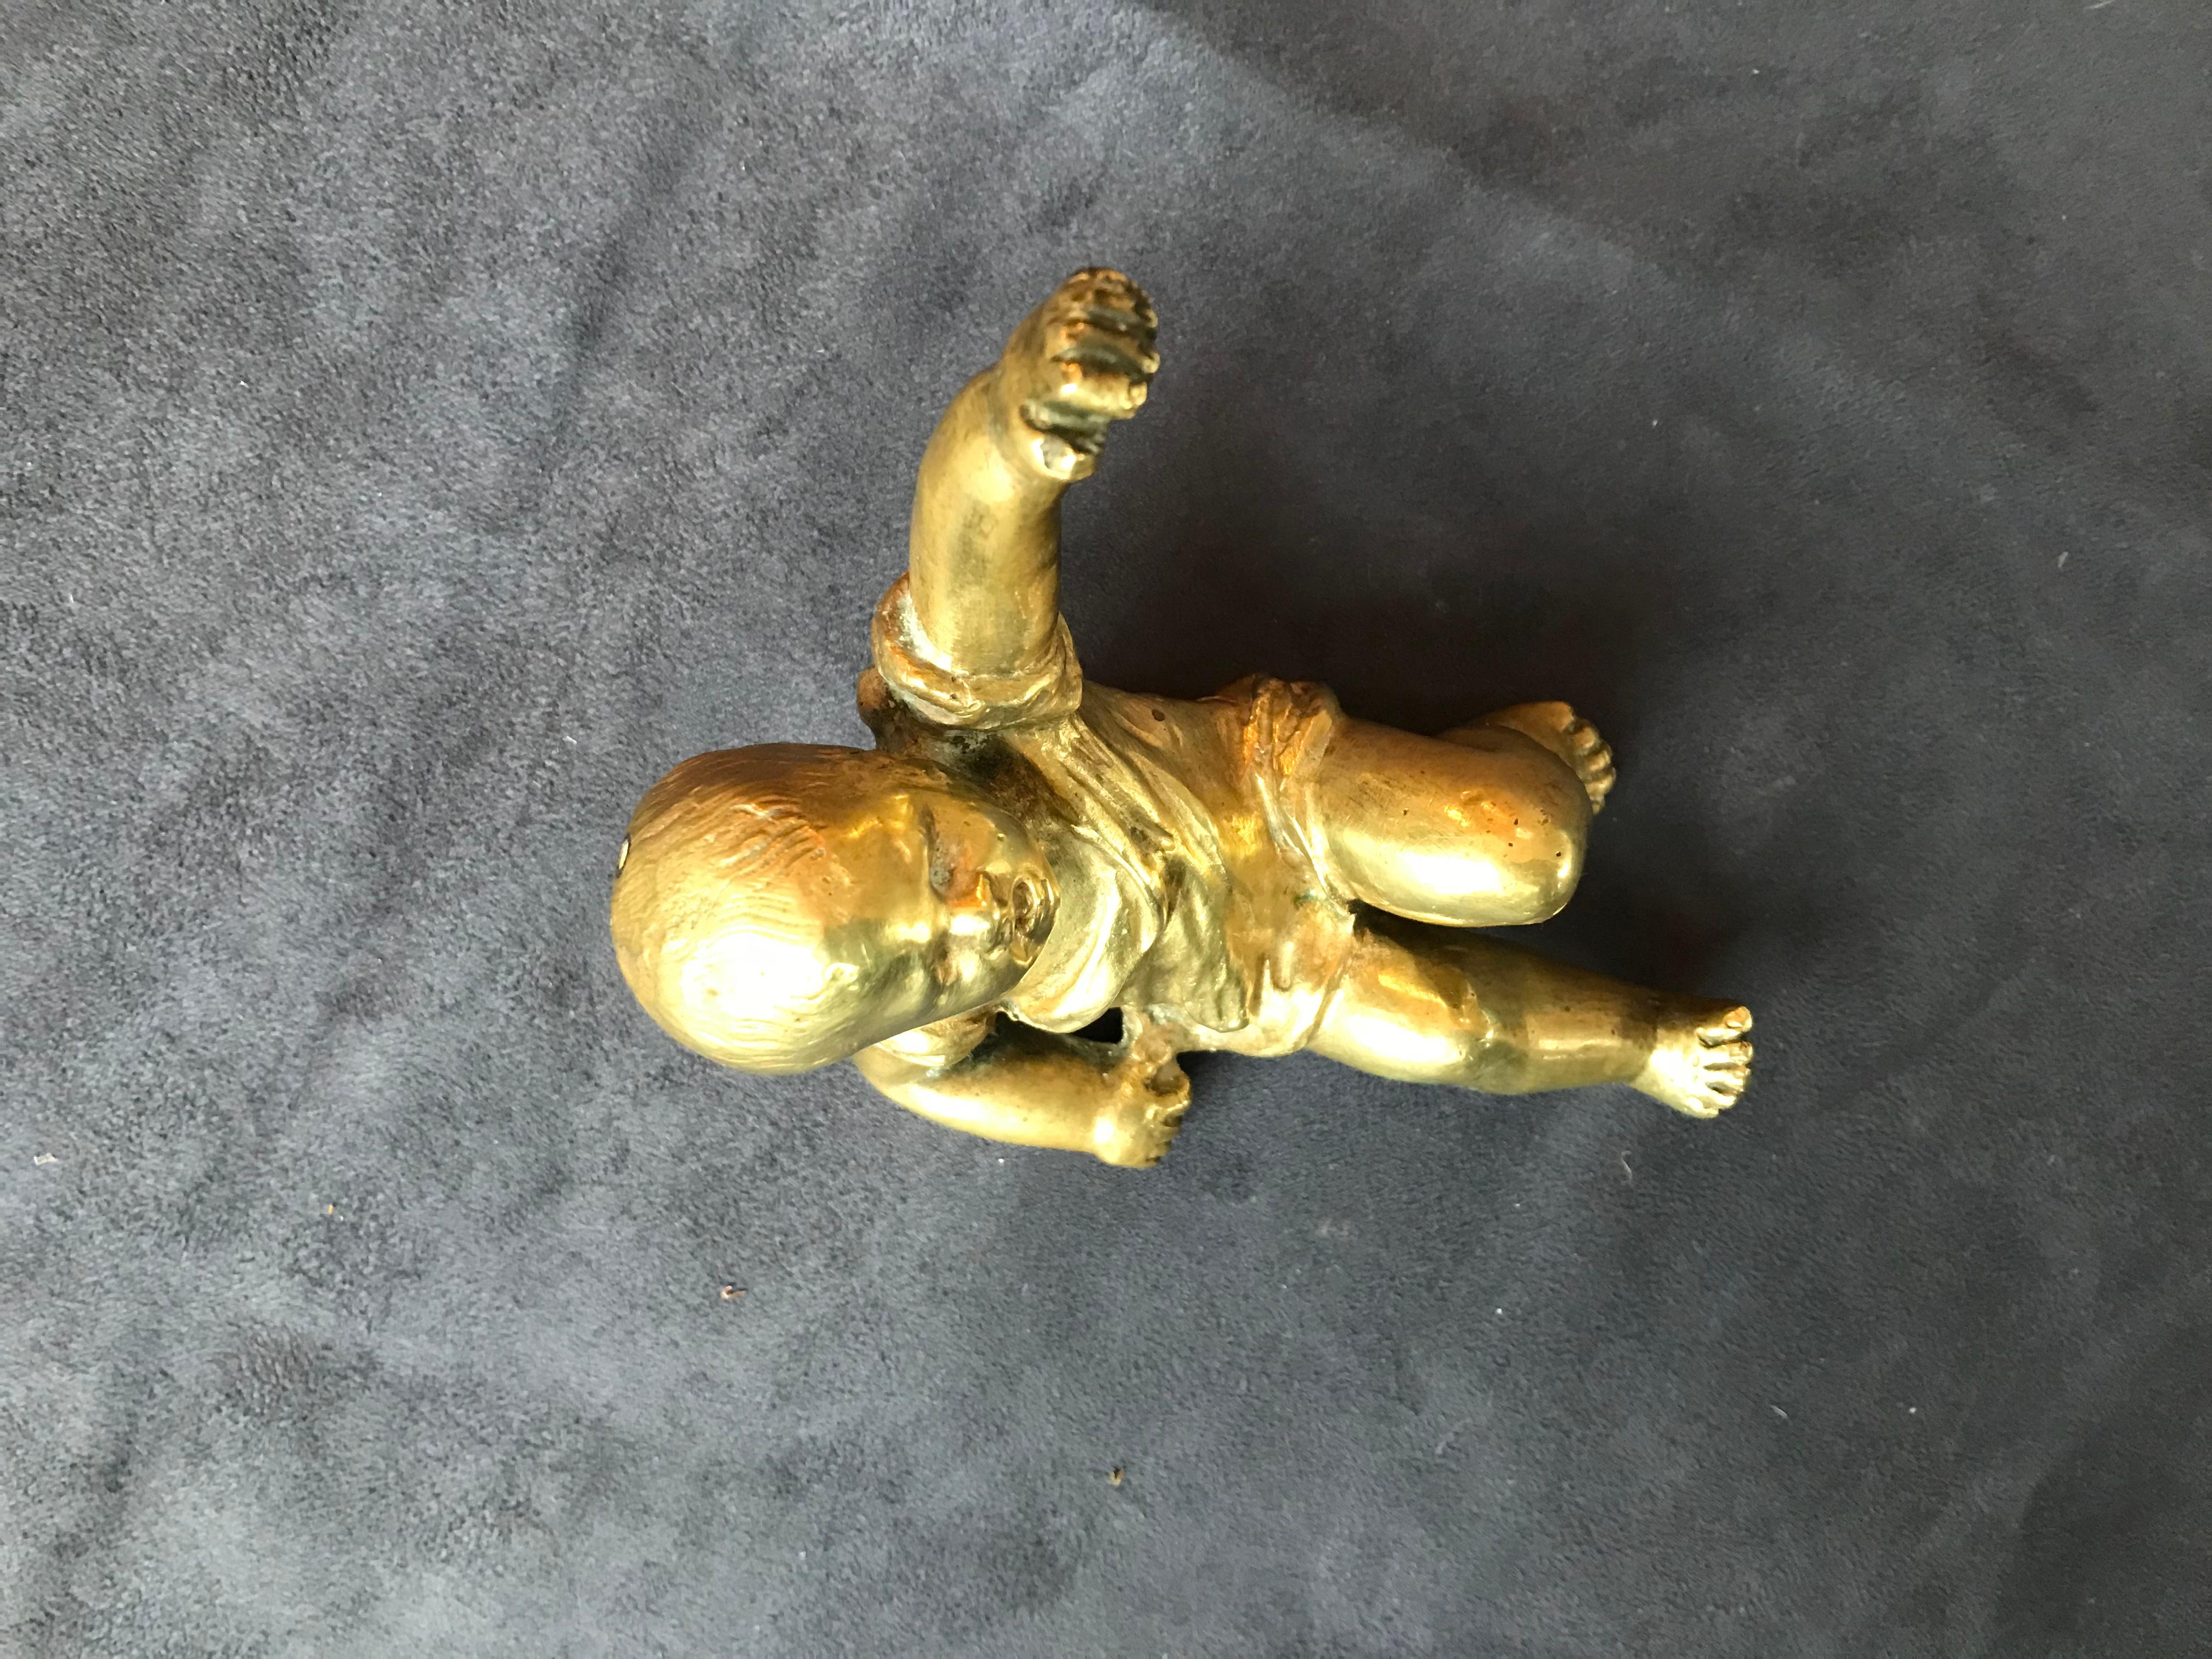 Baby gilt bronze paperweight sculpture.
In an excellent quality and condition.
France, 1950.